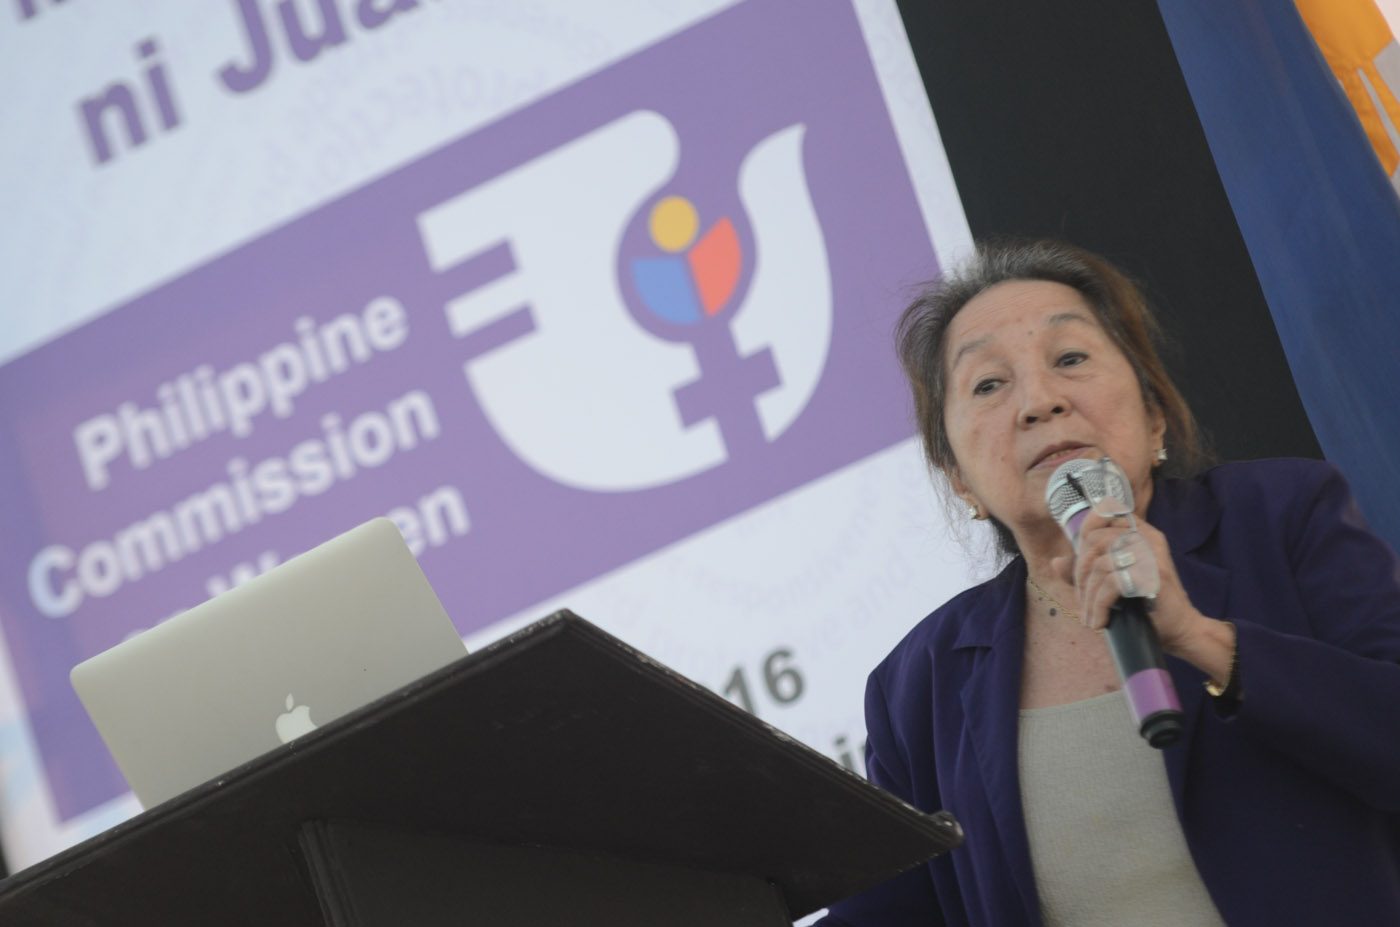 BREAKING BOUNDARIES. Professor Winnie Collas-Monsod briefs the crowd about the Filipina's various roles in today's society. Photo by Alecs Ongcal/Rappler   